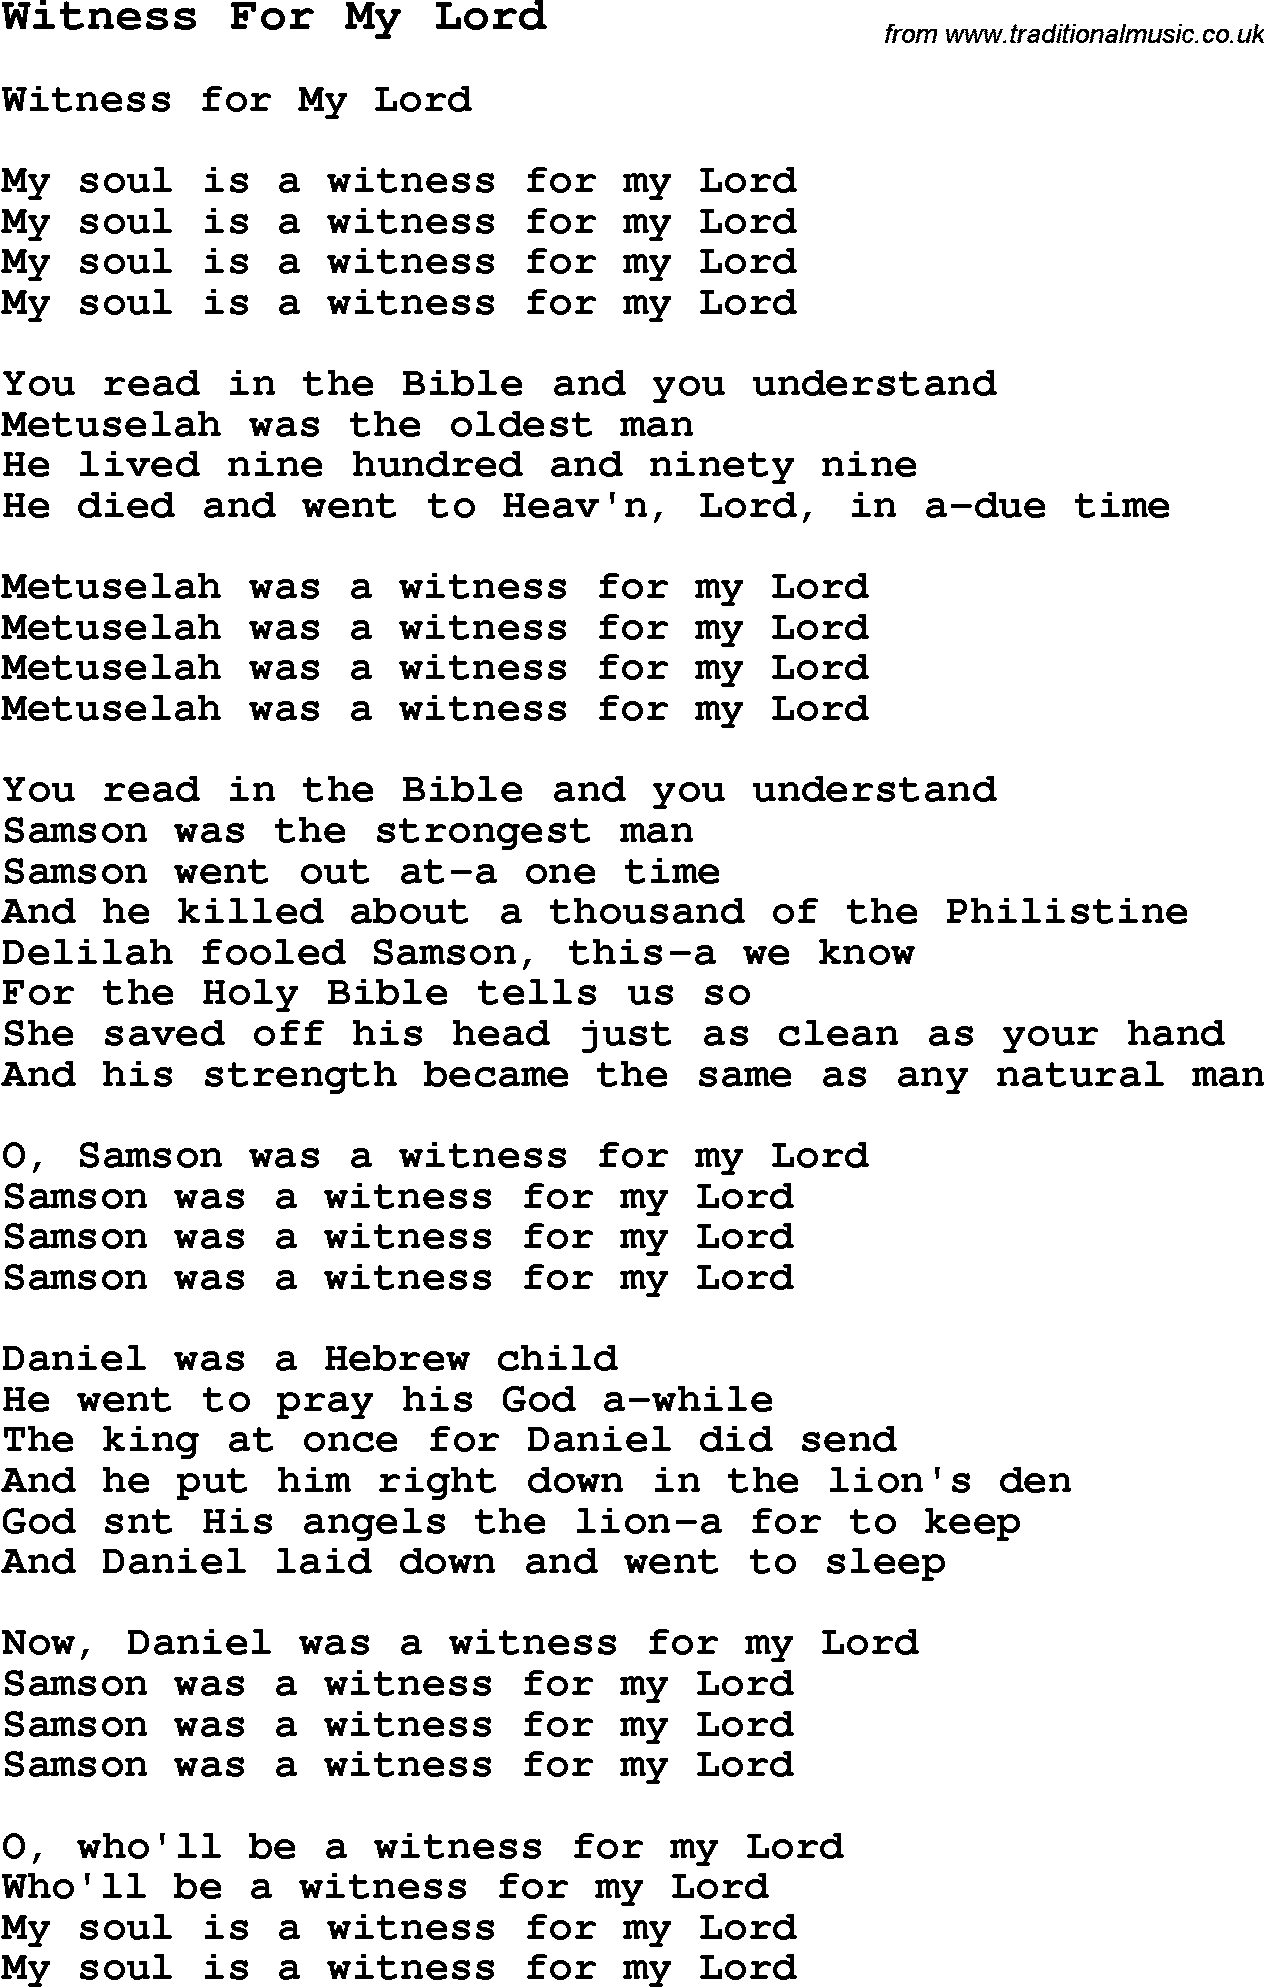 Negro Spiritual Song Lyrics for Witness For My Lord